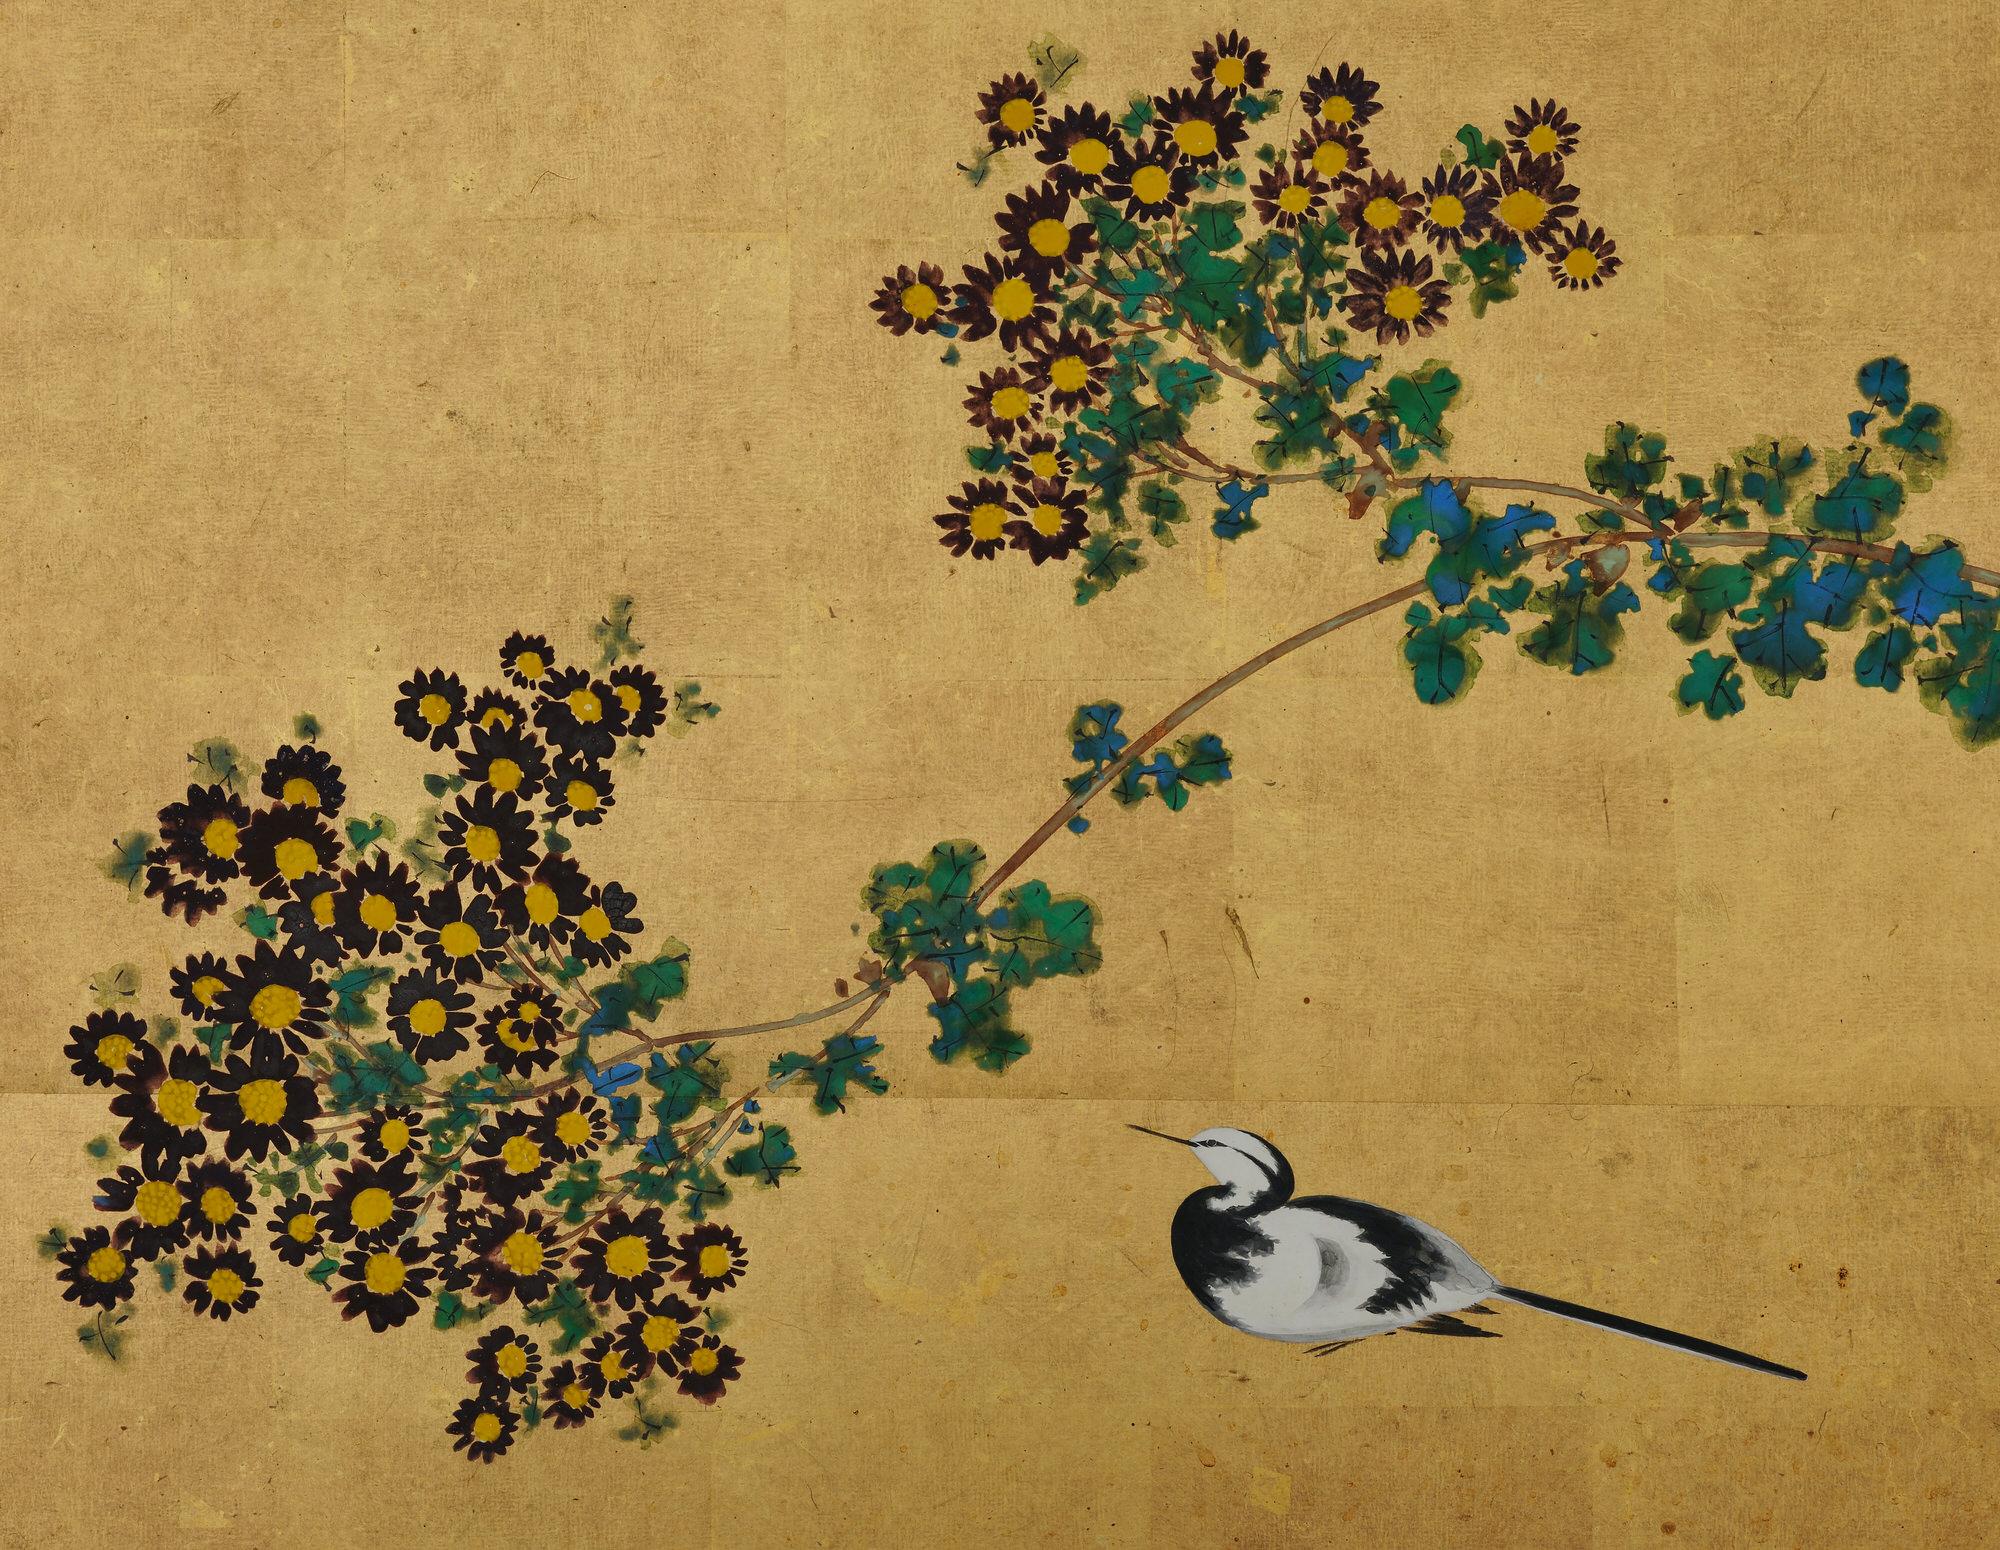 Ishizaki Koyo (1884-1947)

Wagtail & Chrysanthemum

Early 20th century

Folding screen in two-panels. Ink, pigments and gofun on gold leaf.

Sign: Koyo

Seal: Koyo

This small two-panel folding screen (furosaki byobu), was made for use